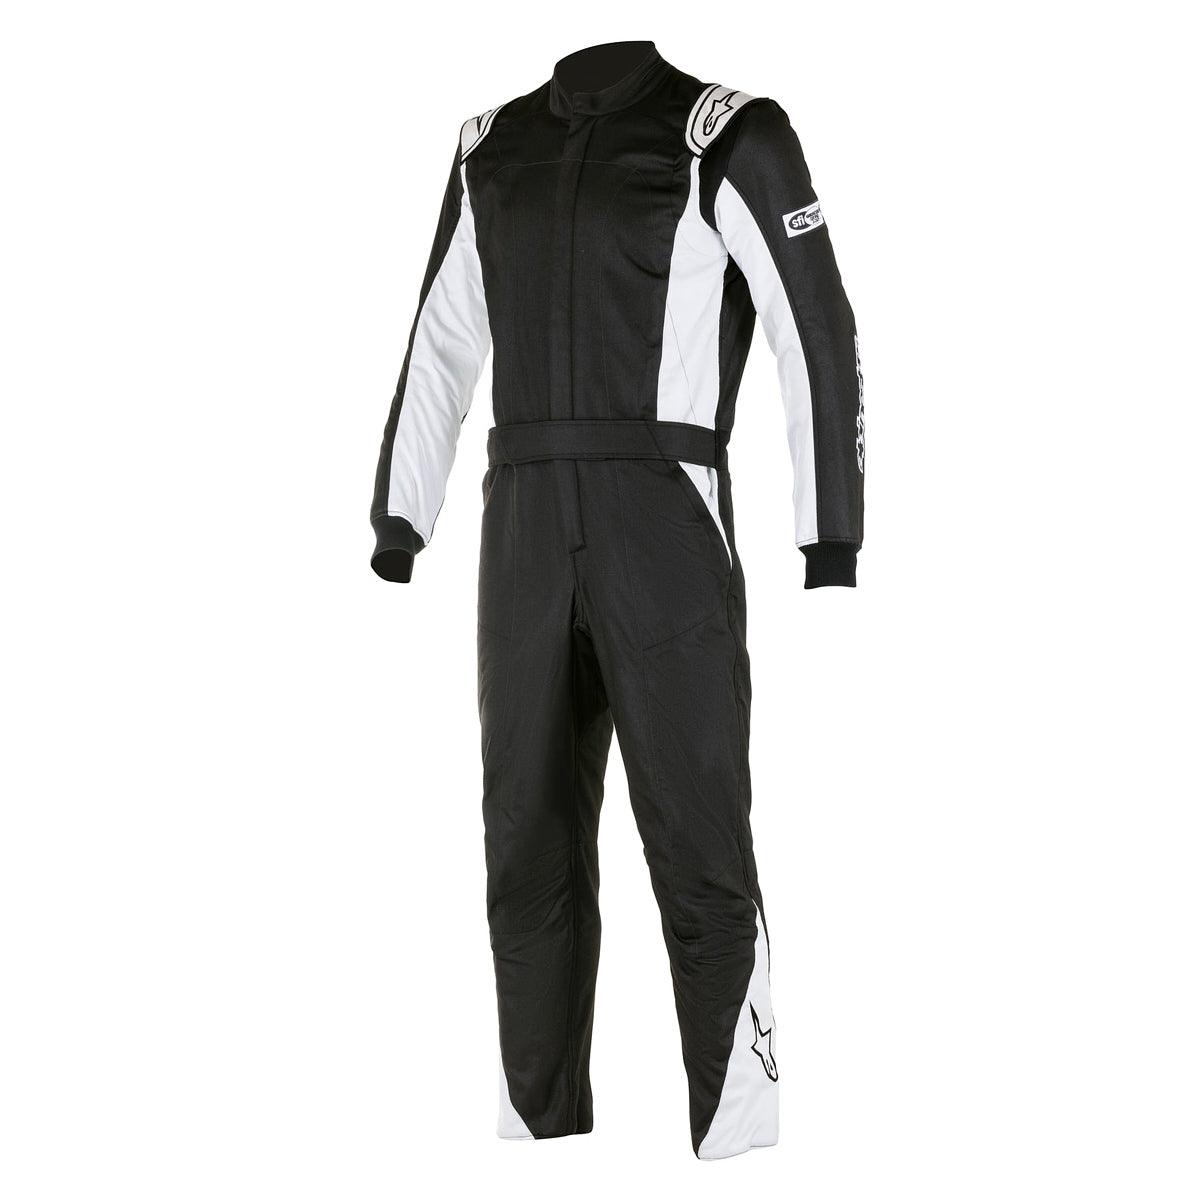 Suit Atom Black / Silver X-Small - Burlile Performance Products